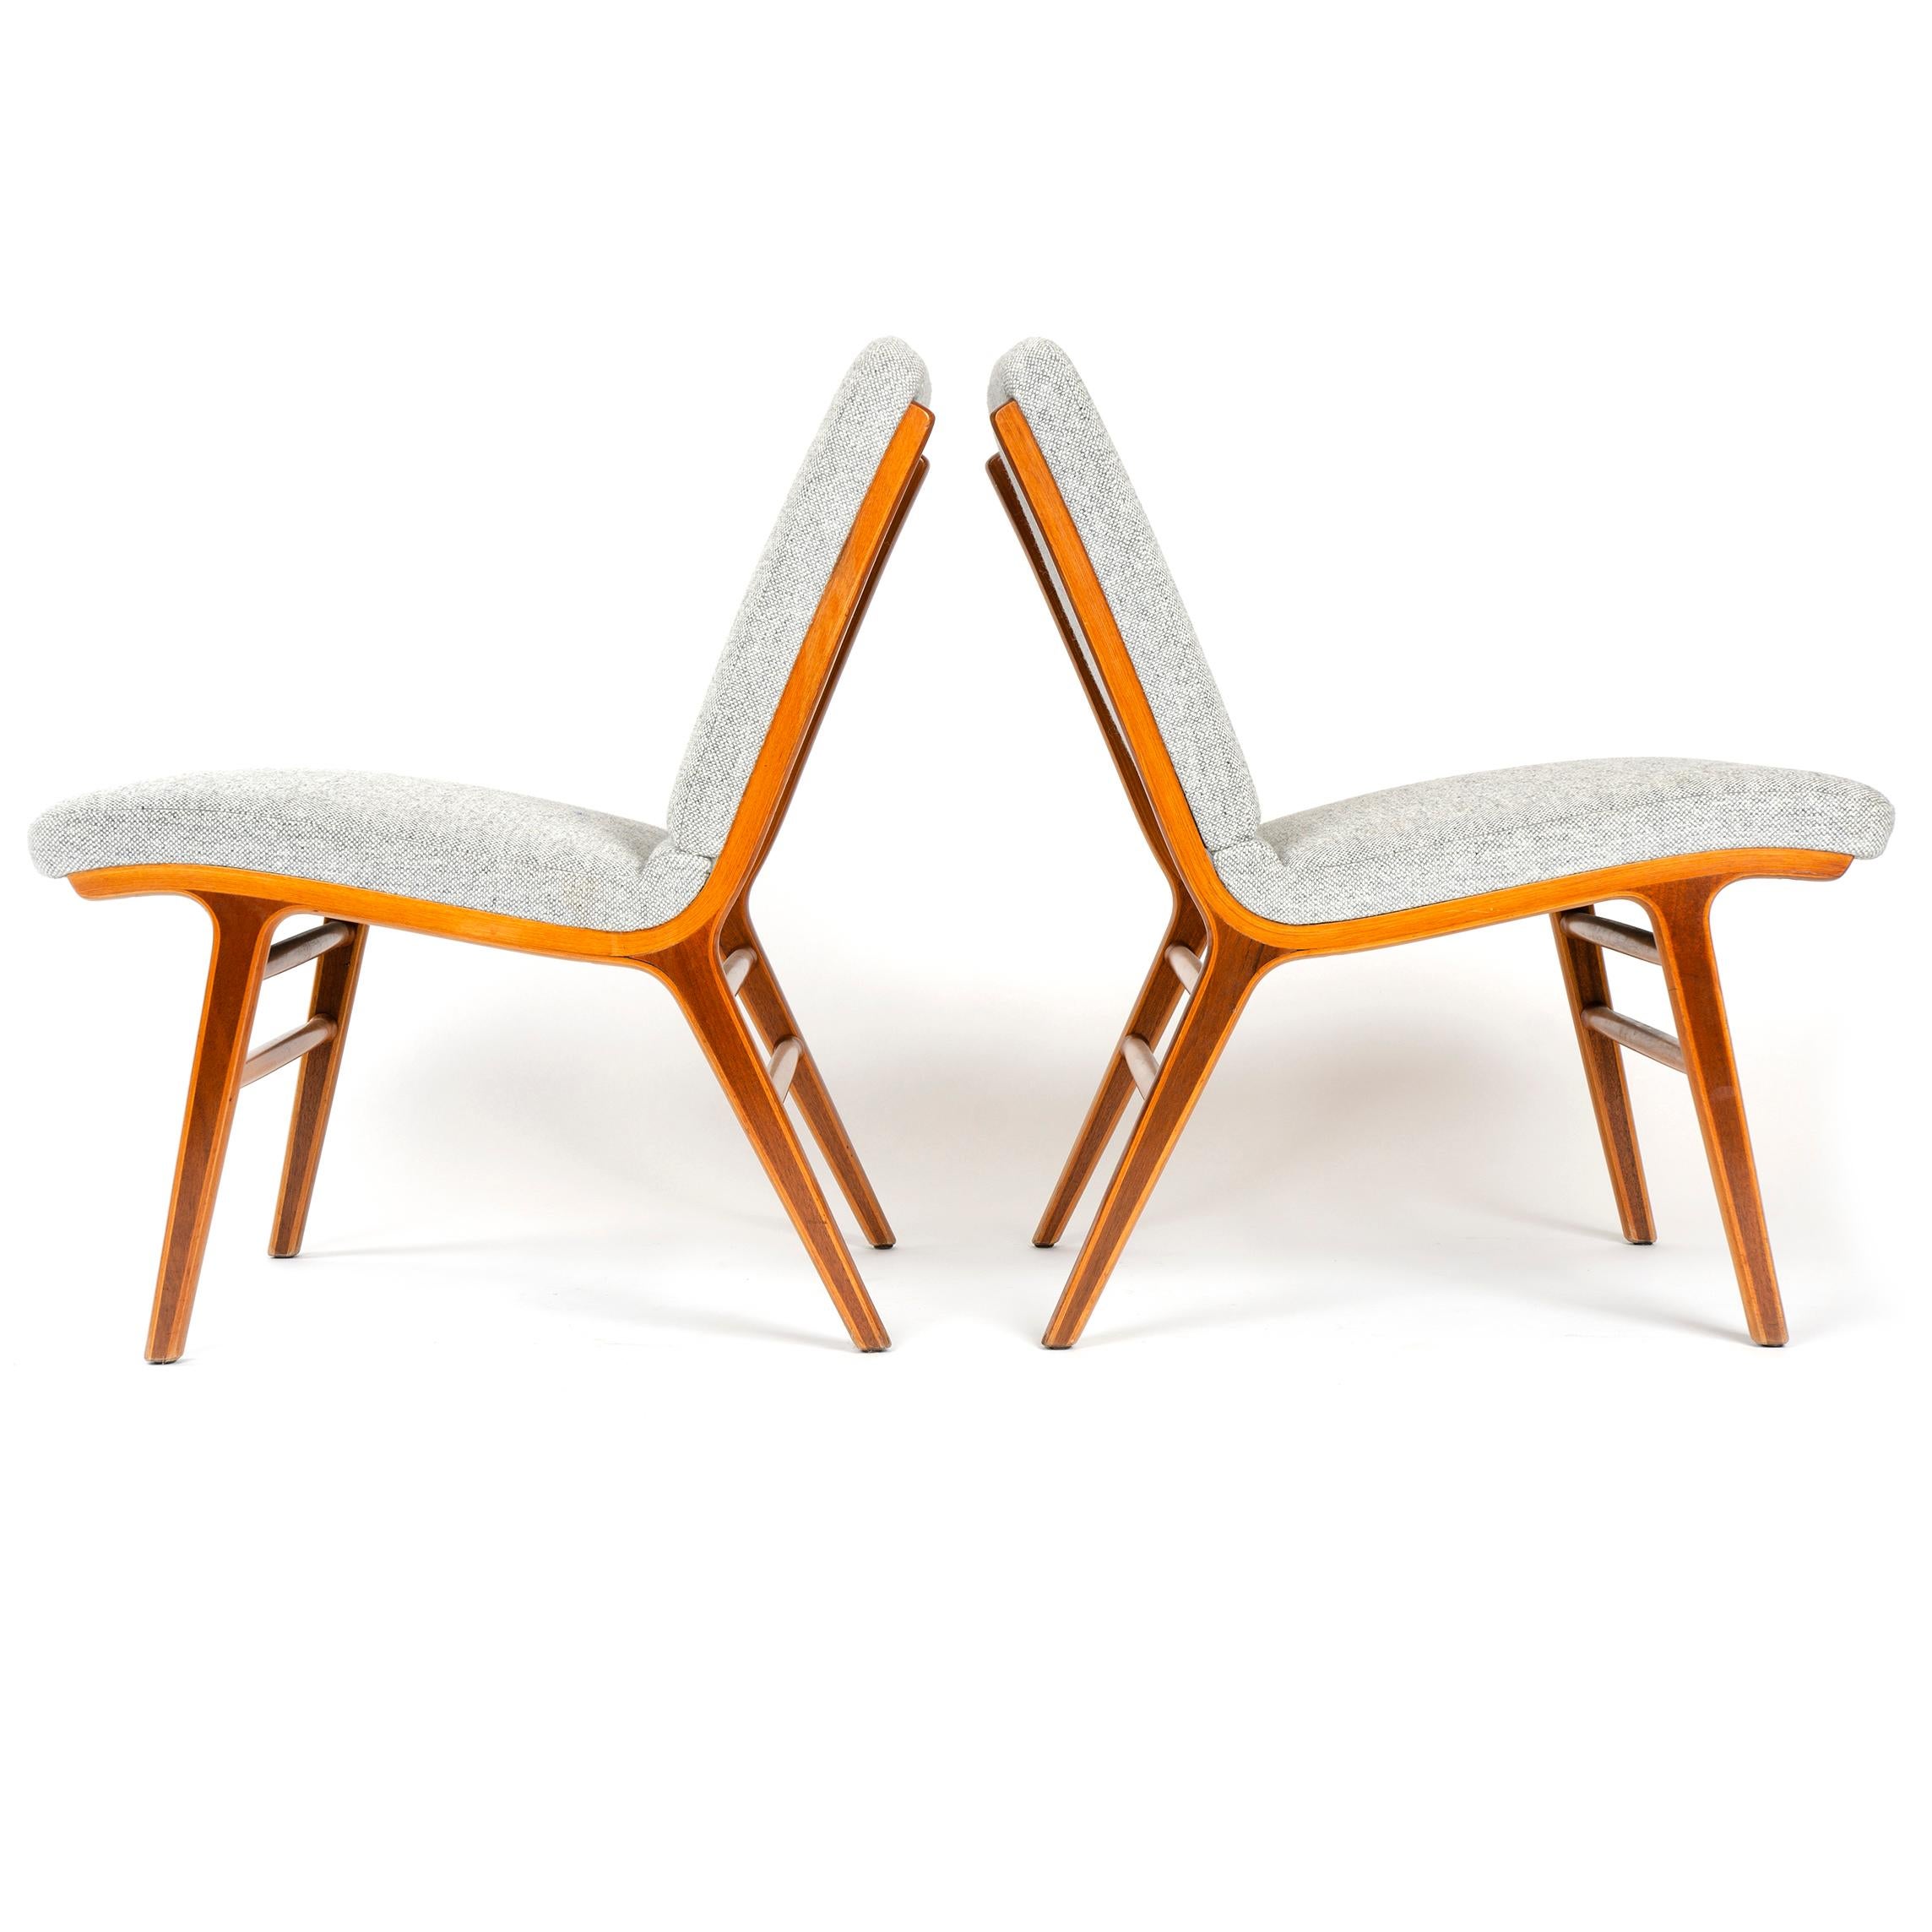 Mid-20th Century 1950s Danish 'Ax' Chairs by Peter Hvidt & Orla Mölgaard-Nielsen for Fritz Hansen For Sale